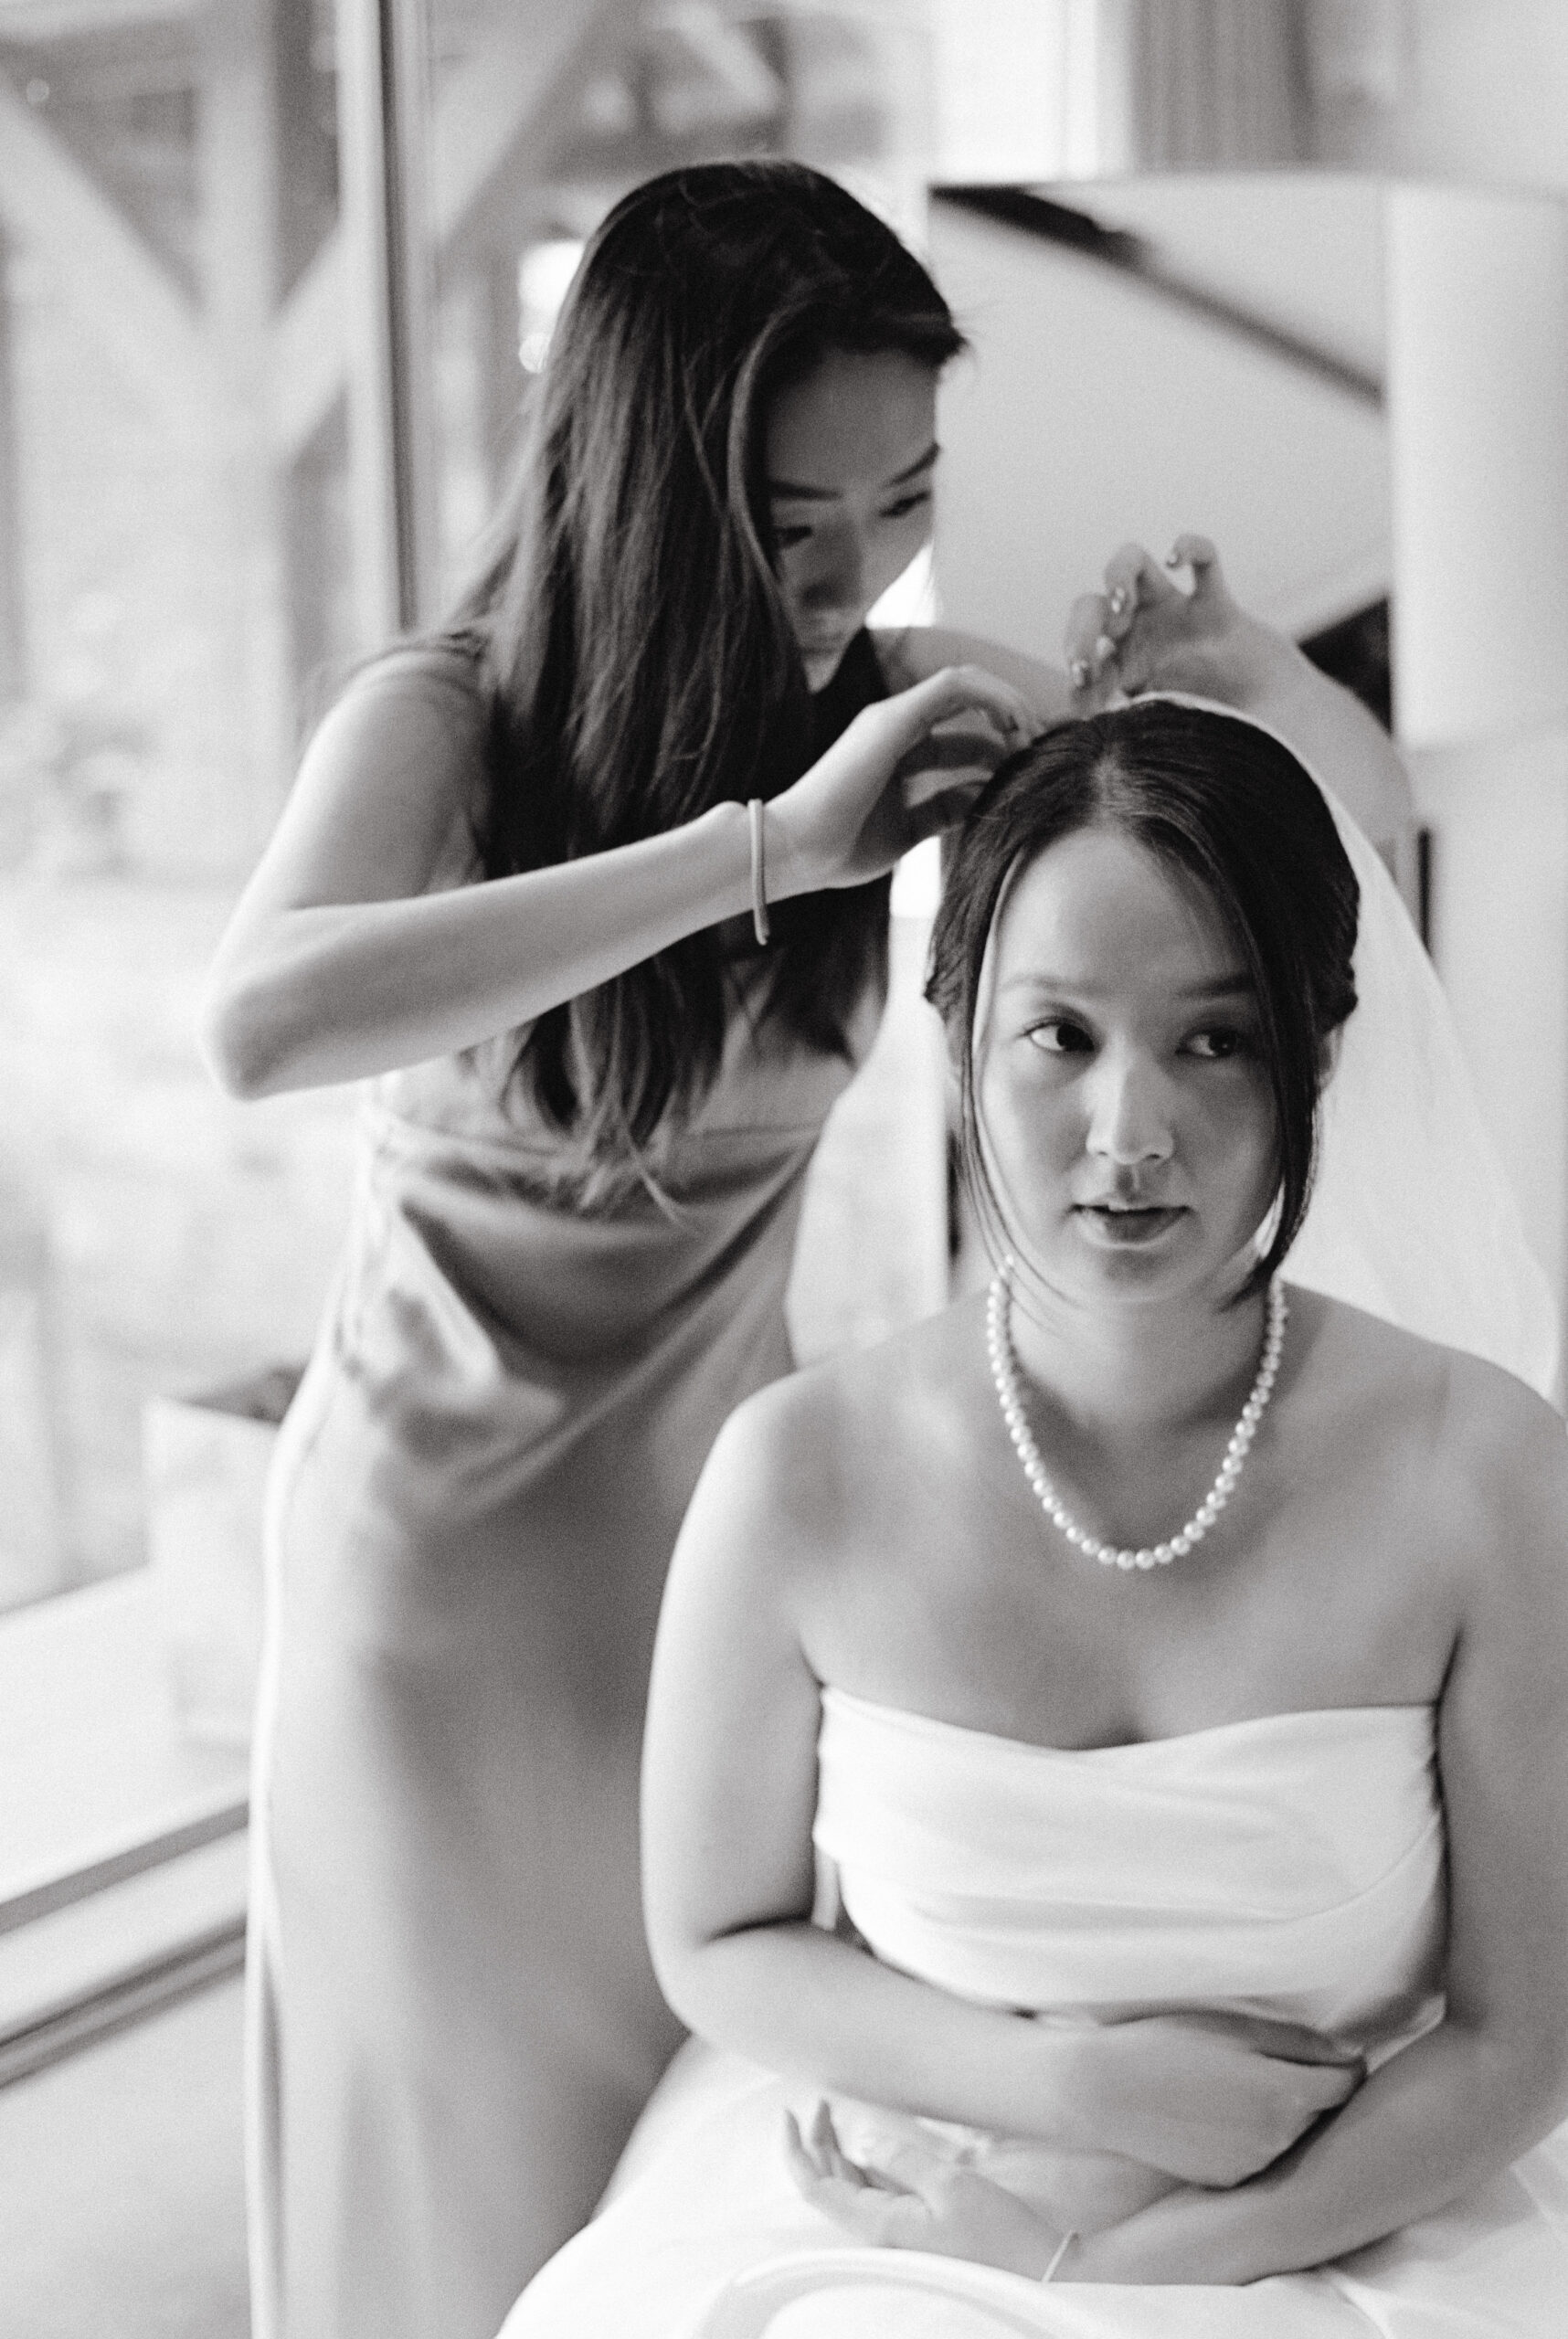 A bridesmaid is fixing the bride's hair and veil after the wedding ceremony. Photojournalistic image by Jenny Fu Studio